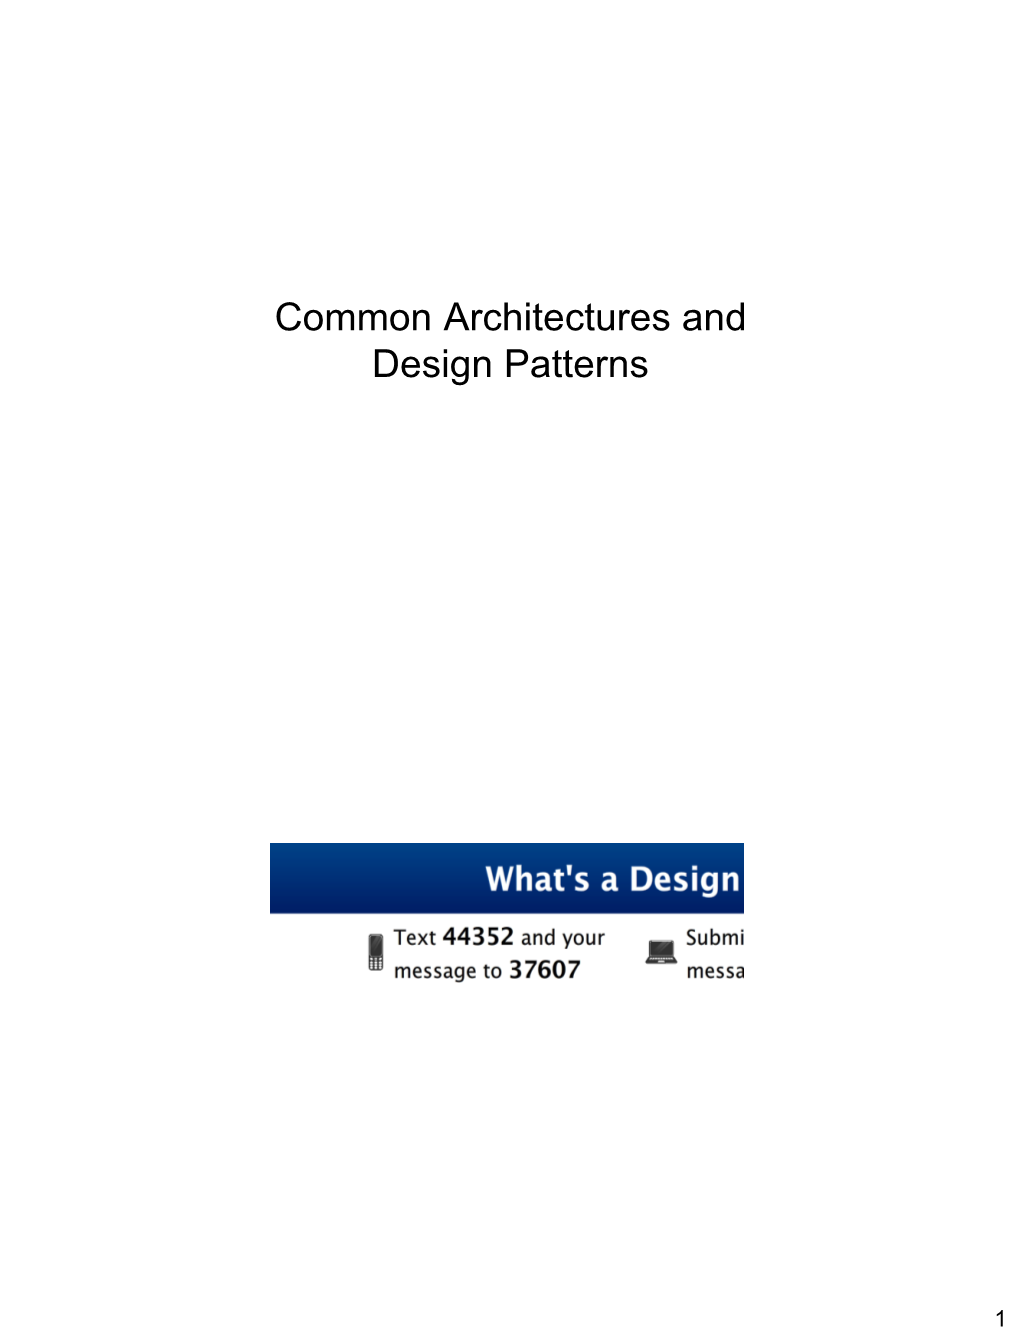 Common Architectures and Design Patterns